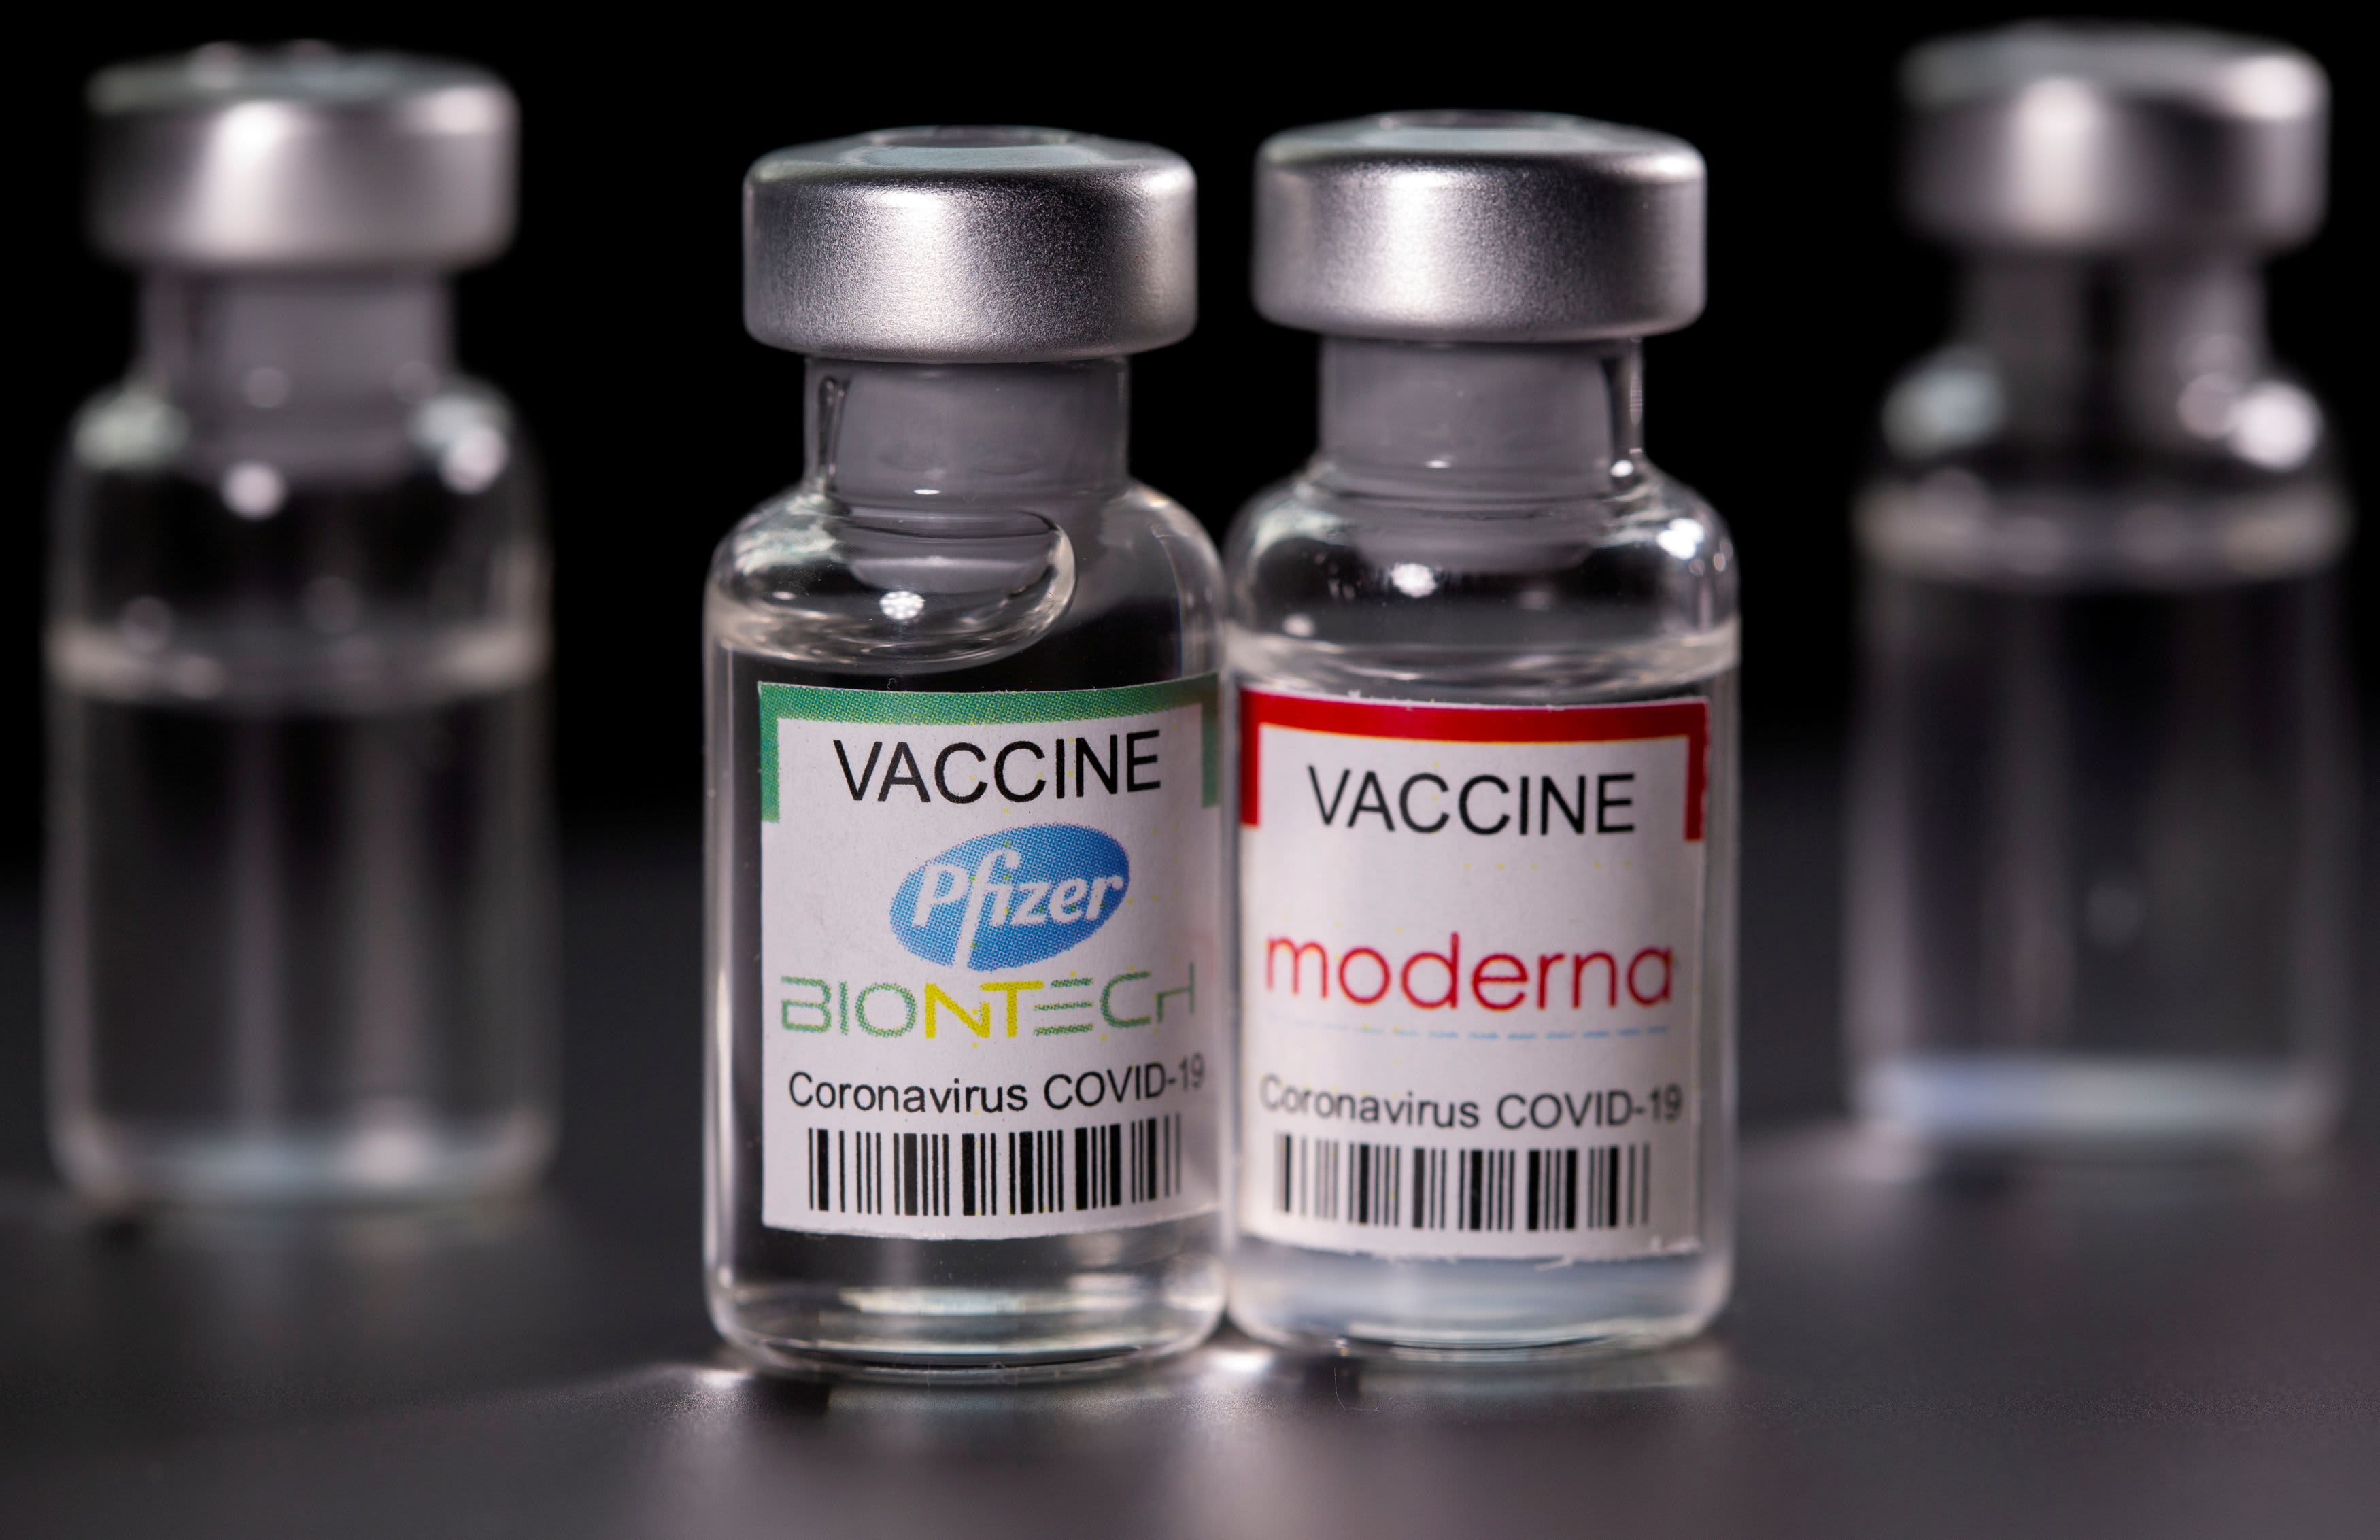 Antibody levels in COVID-19 vaccines: Study compares Pfizer and Moderna